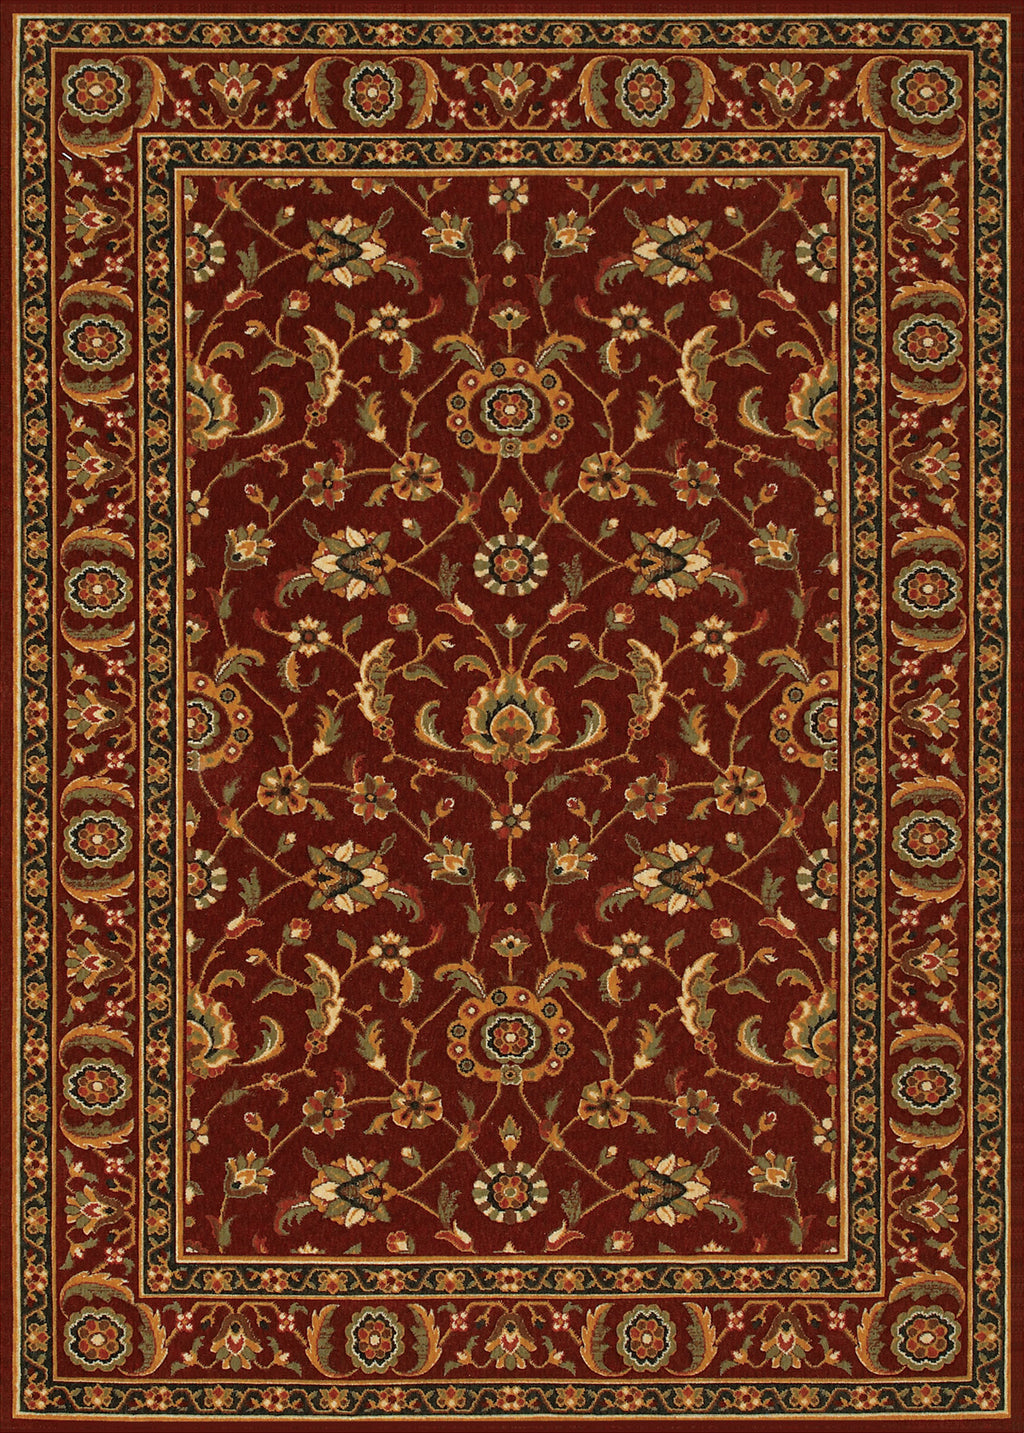 Couristan Royal Luxury Brentwood Bordeaux Area Rug